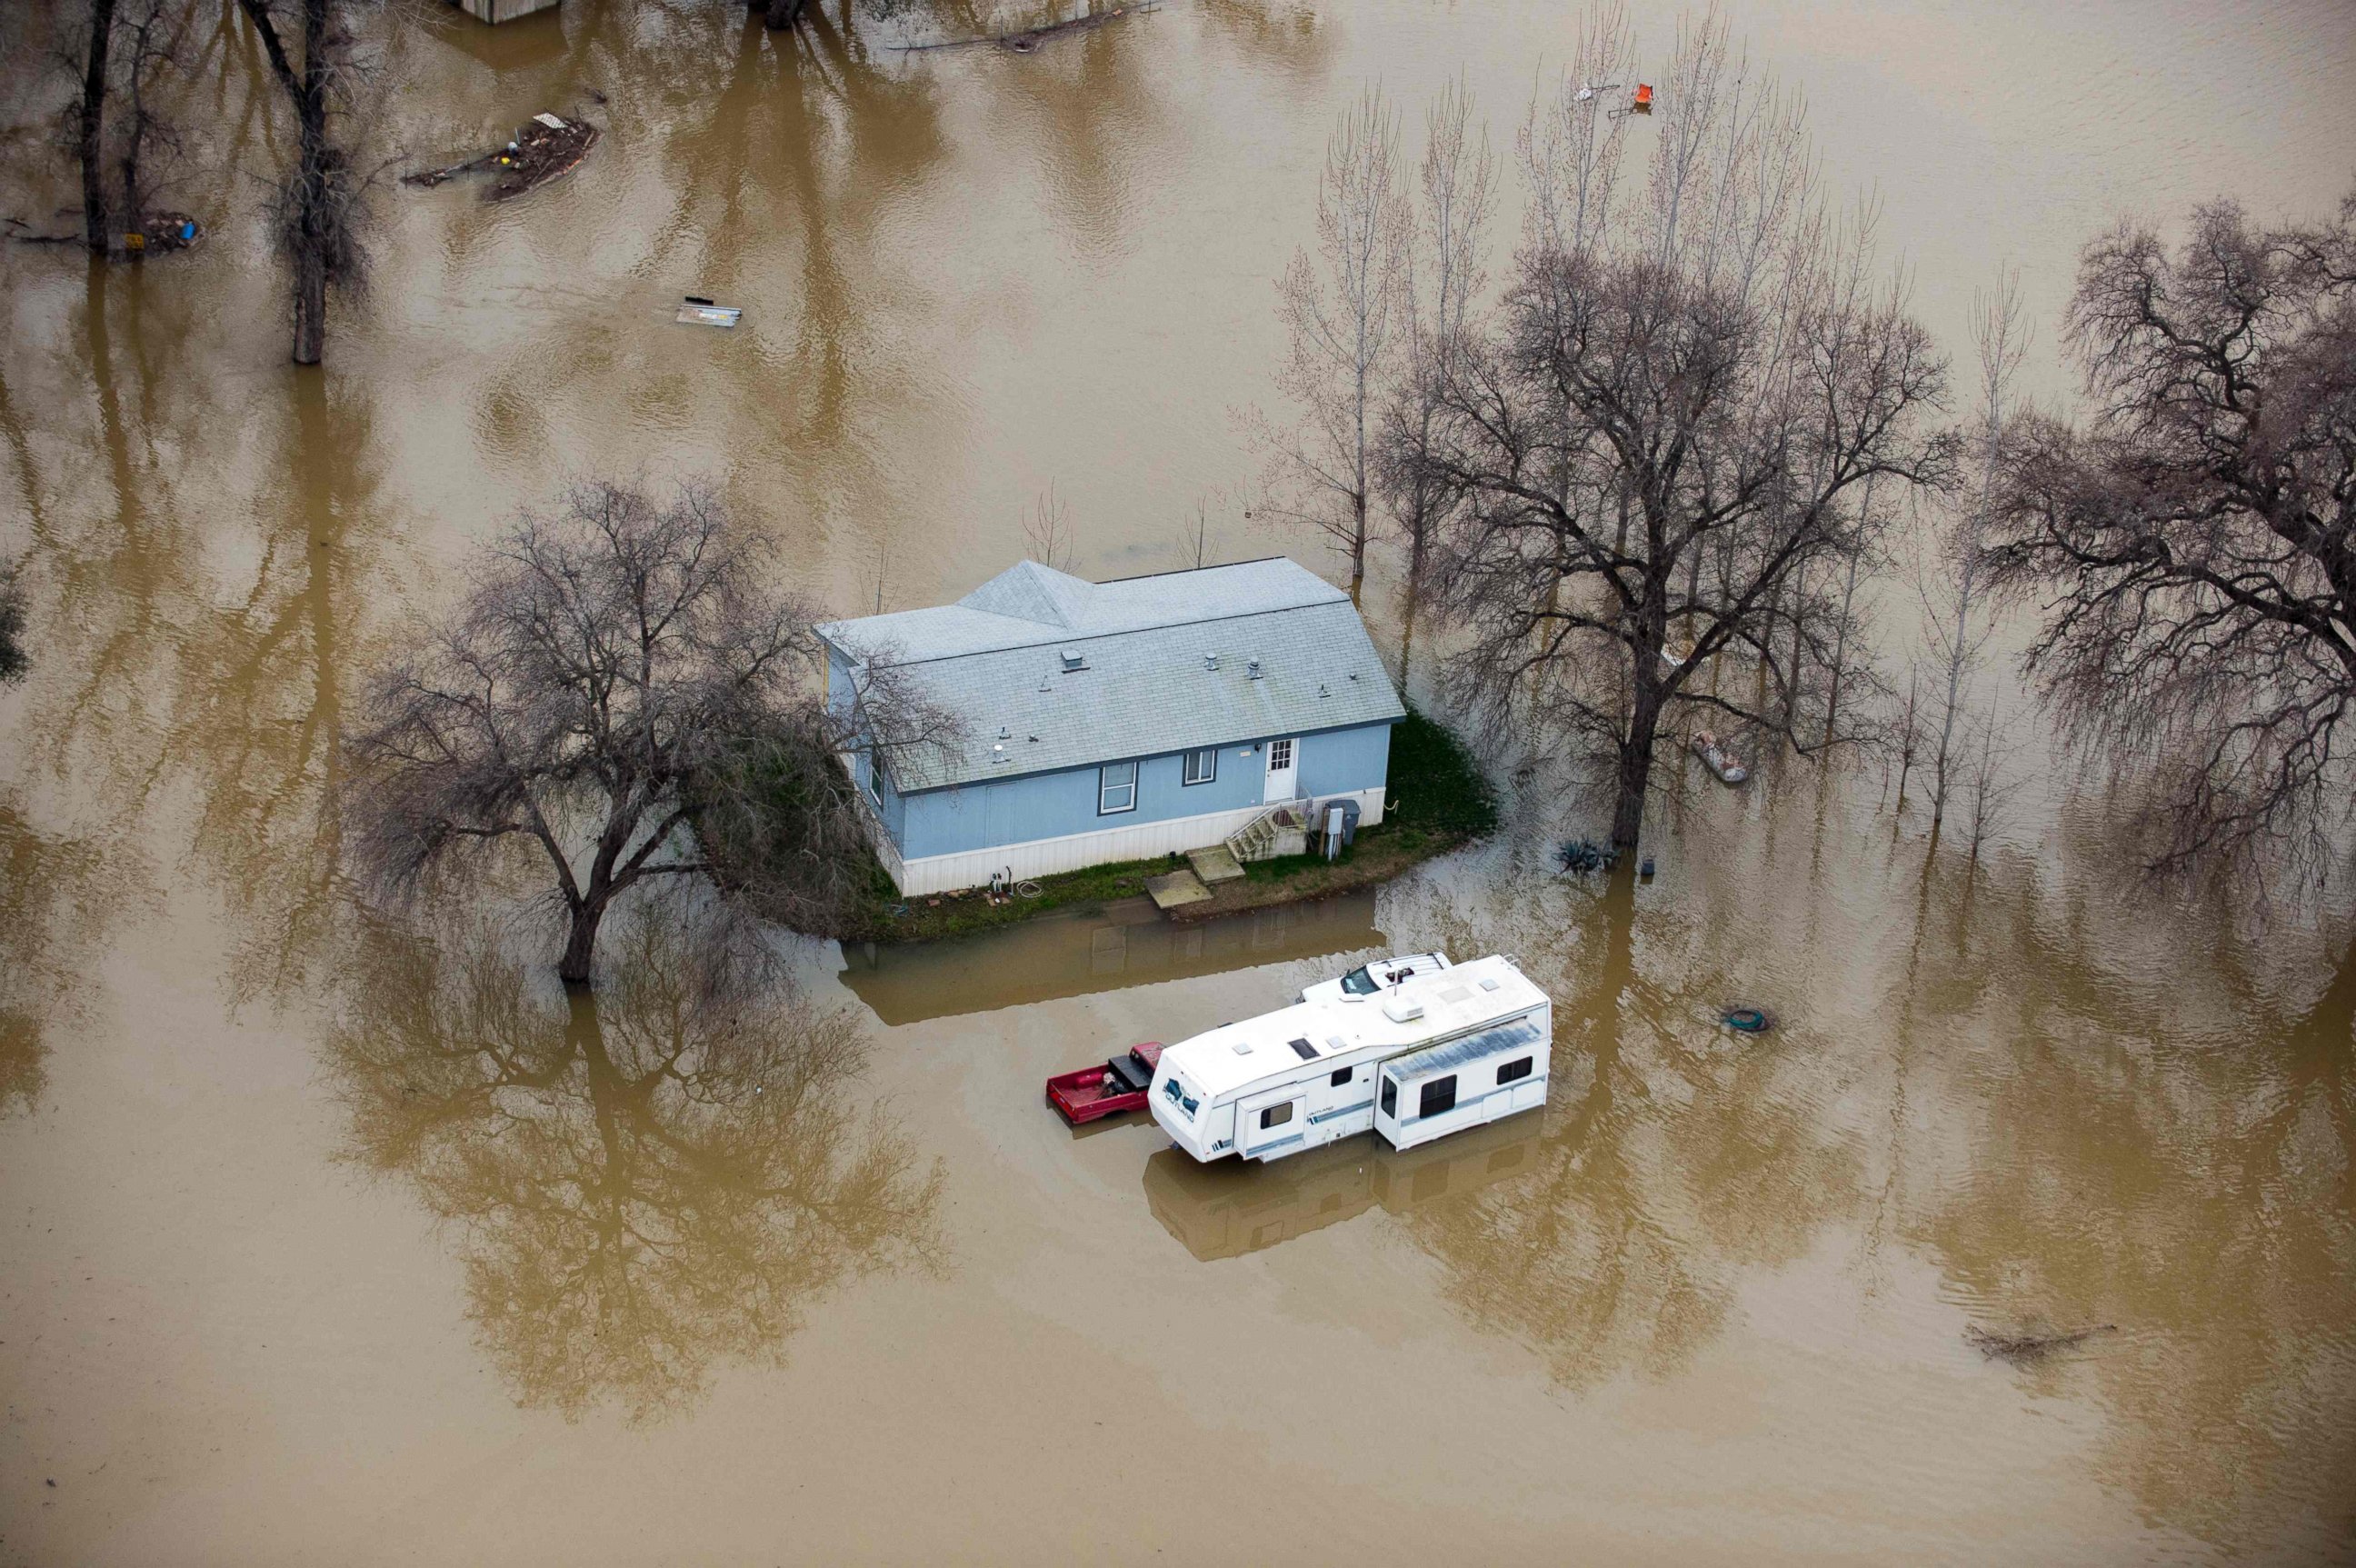 PHOTO: A home is seen marooned as the surrounding property is submerged in flood water in Oroville, California, Feb. 13, 2017.
